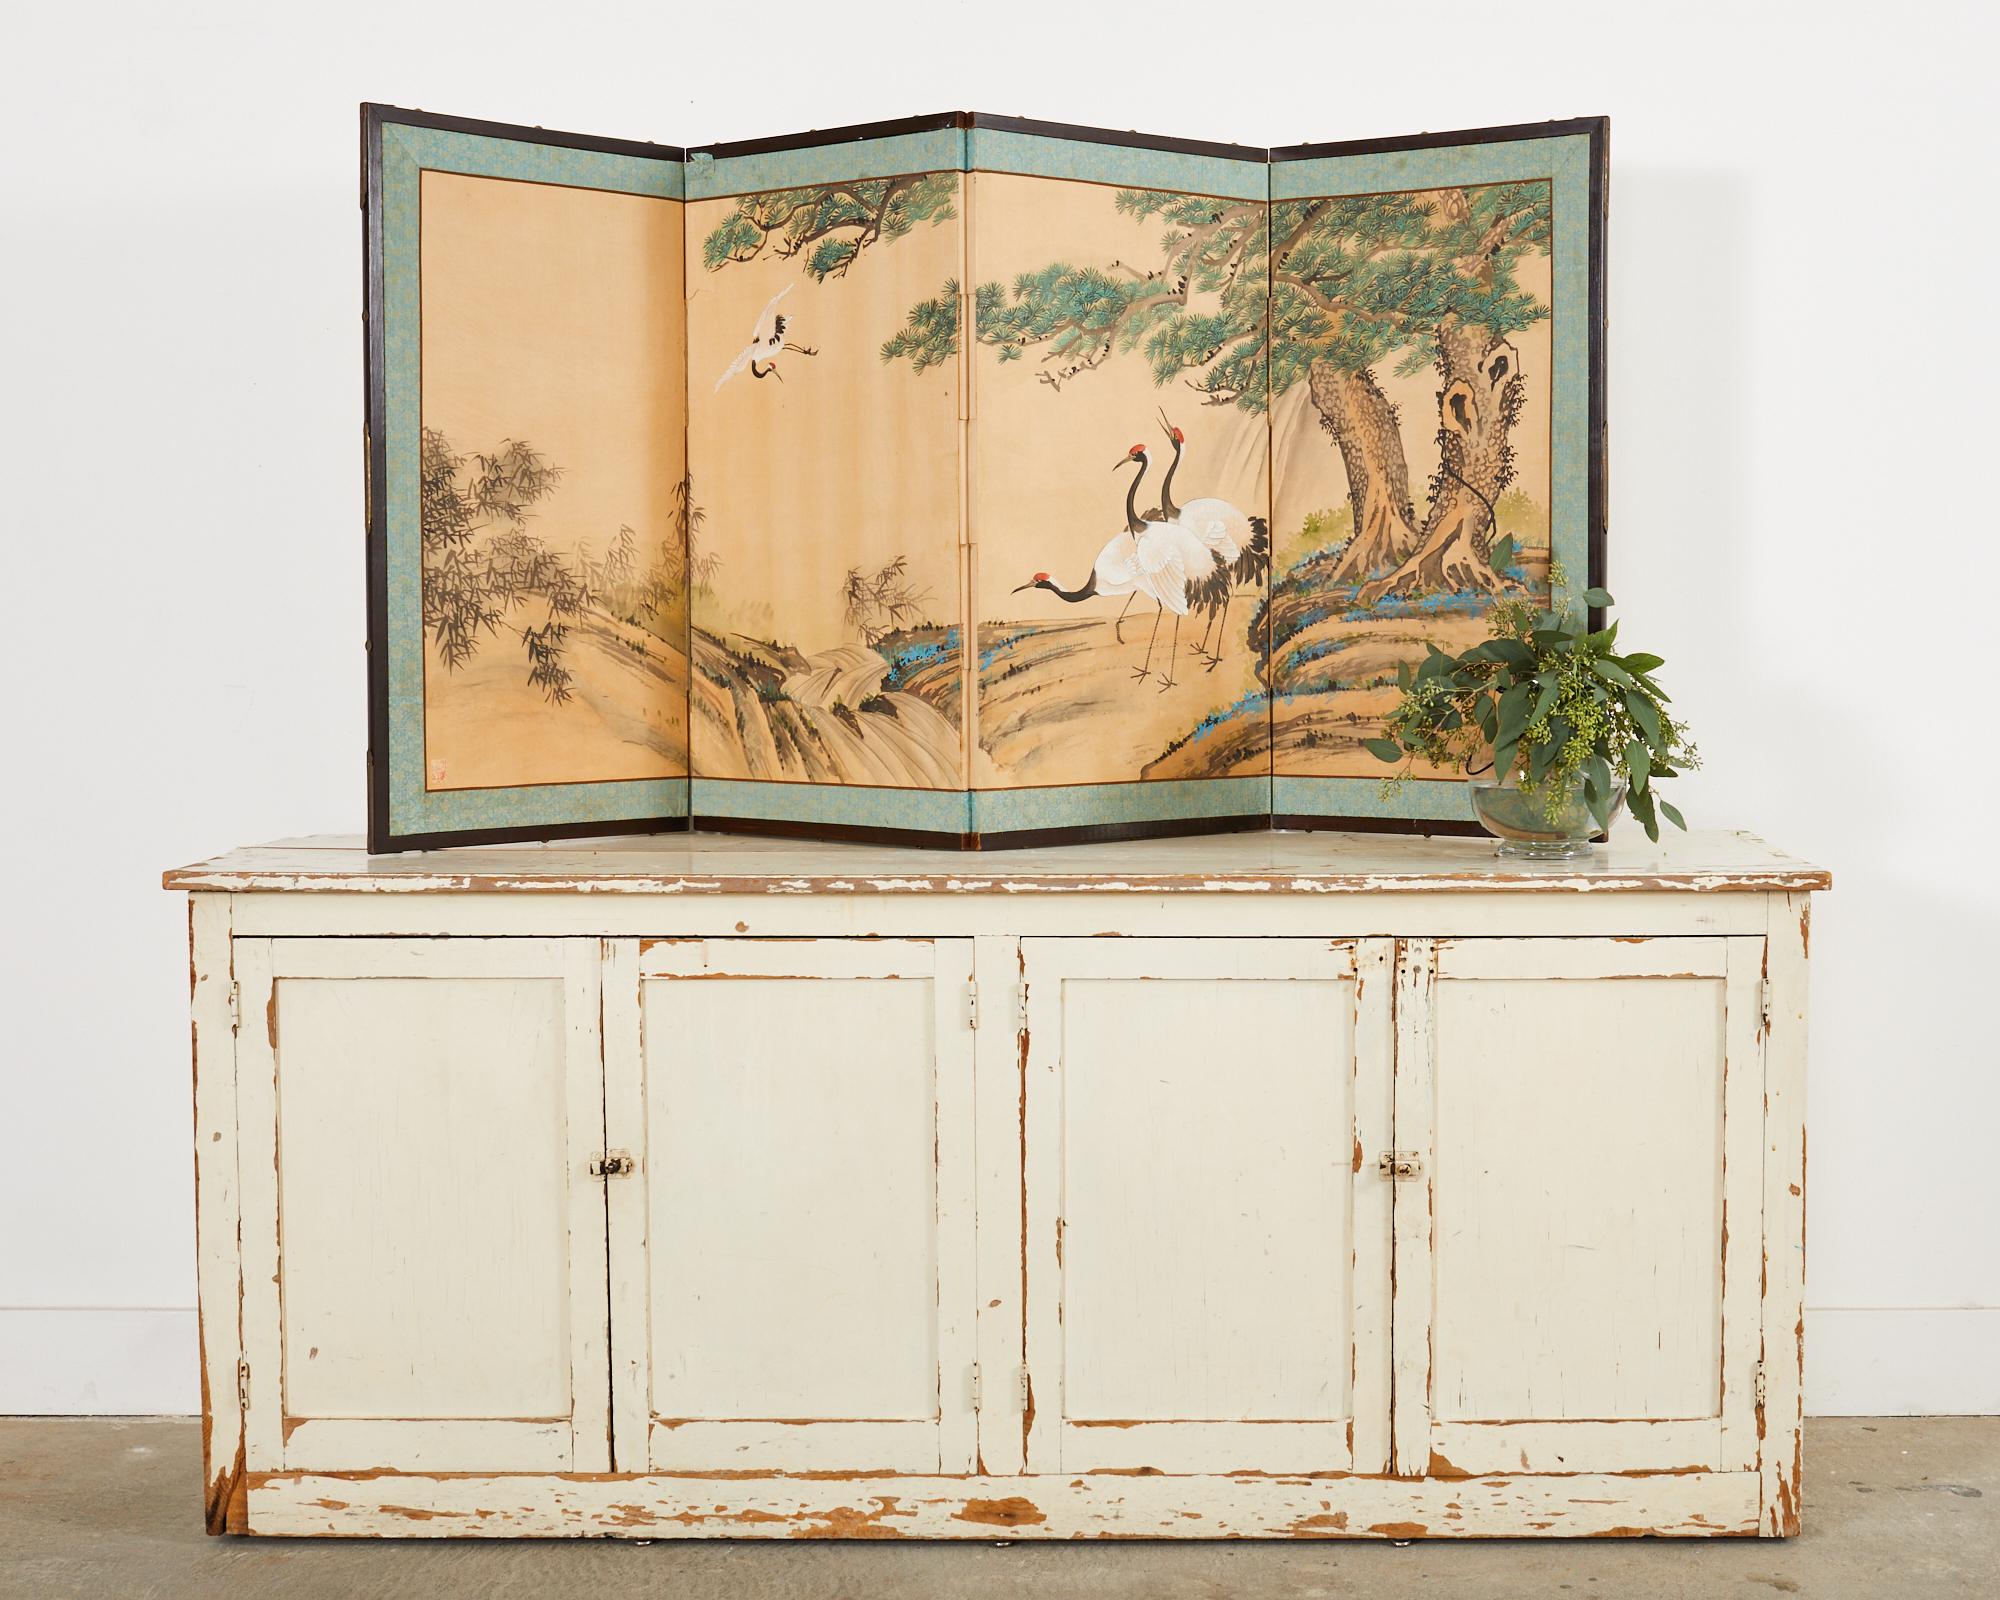 Distinctive Japanese style Showa period four panel folding byobu screen featuring four cranes near ancient pine trees. The beautifully depicted landscape has a stream and bamboo in the background. Ink and vivid color pigments on hand-crafted paper